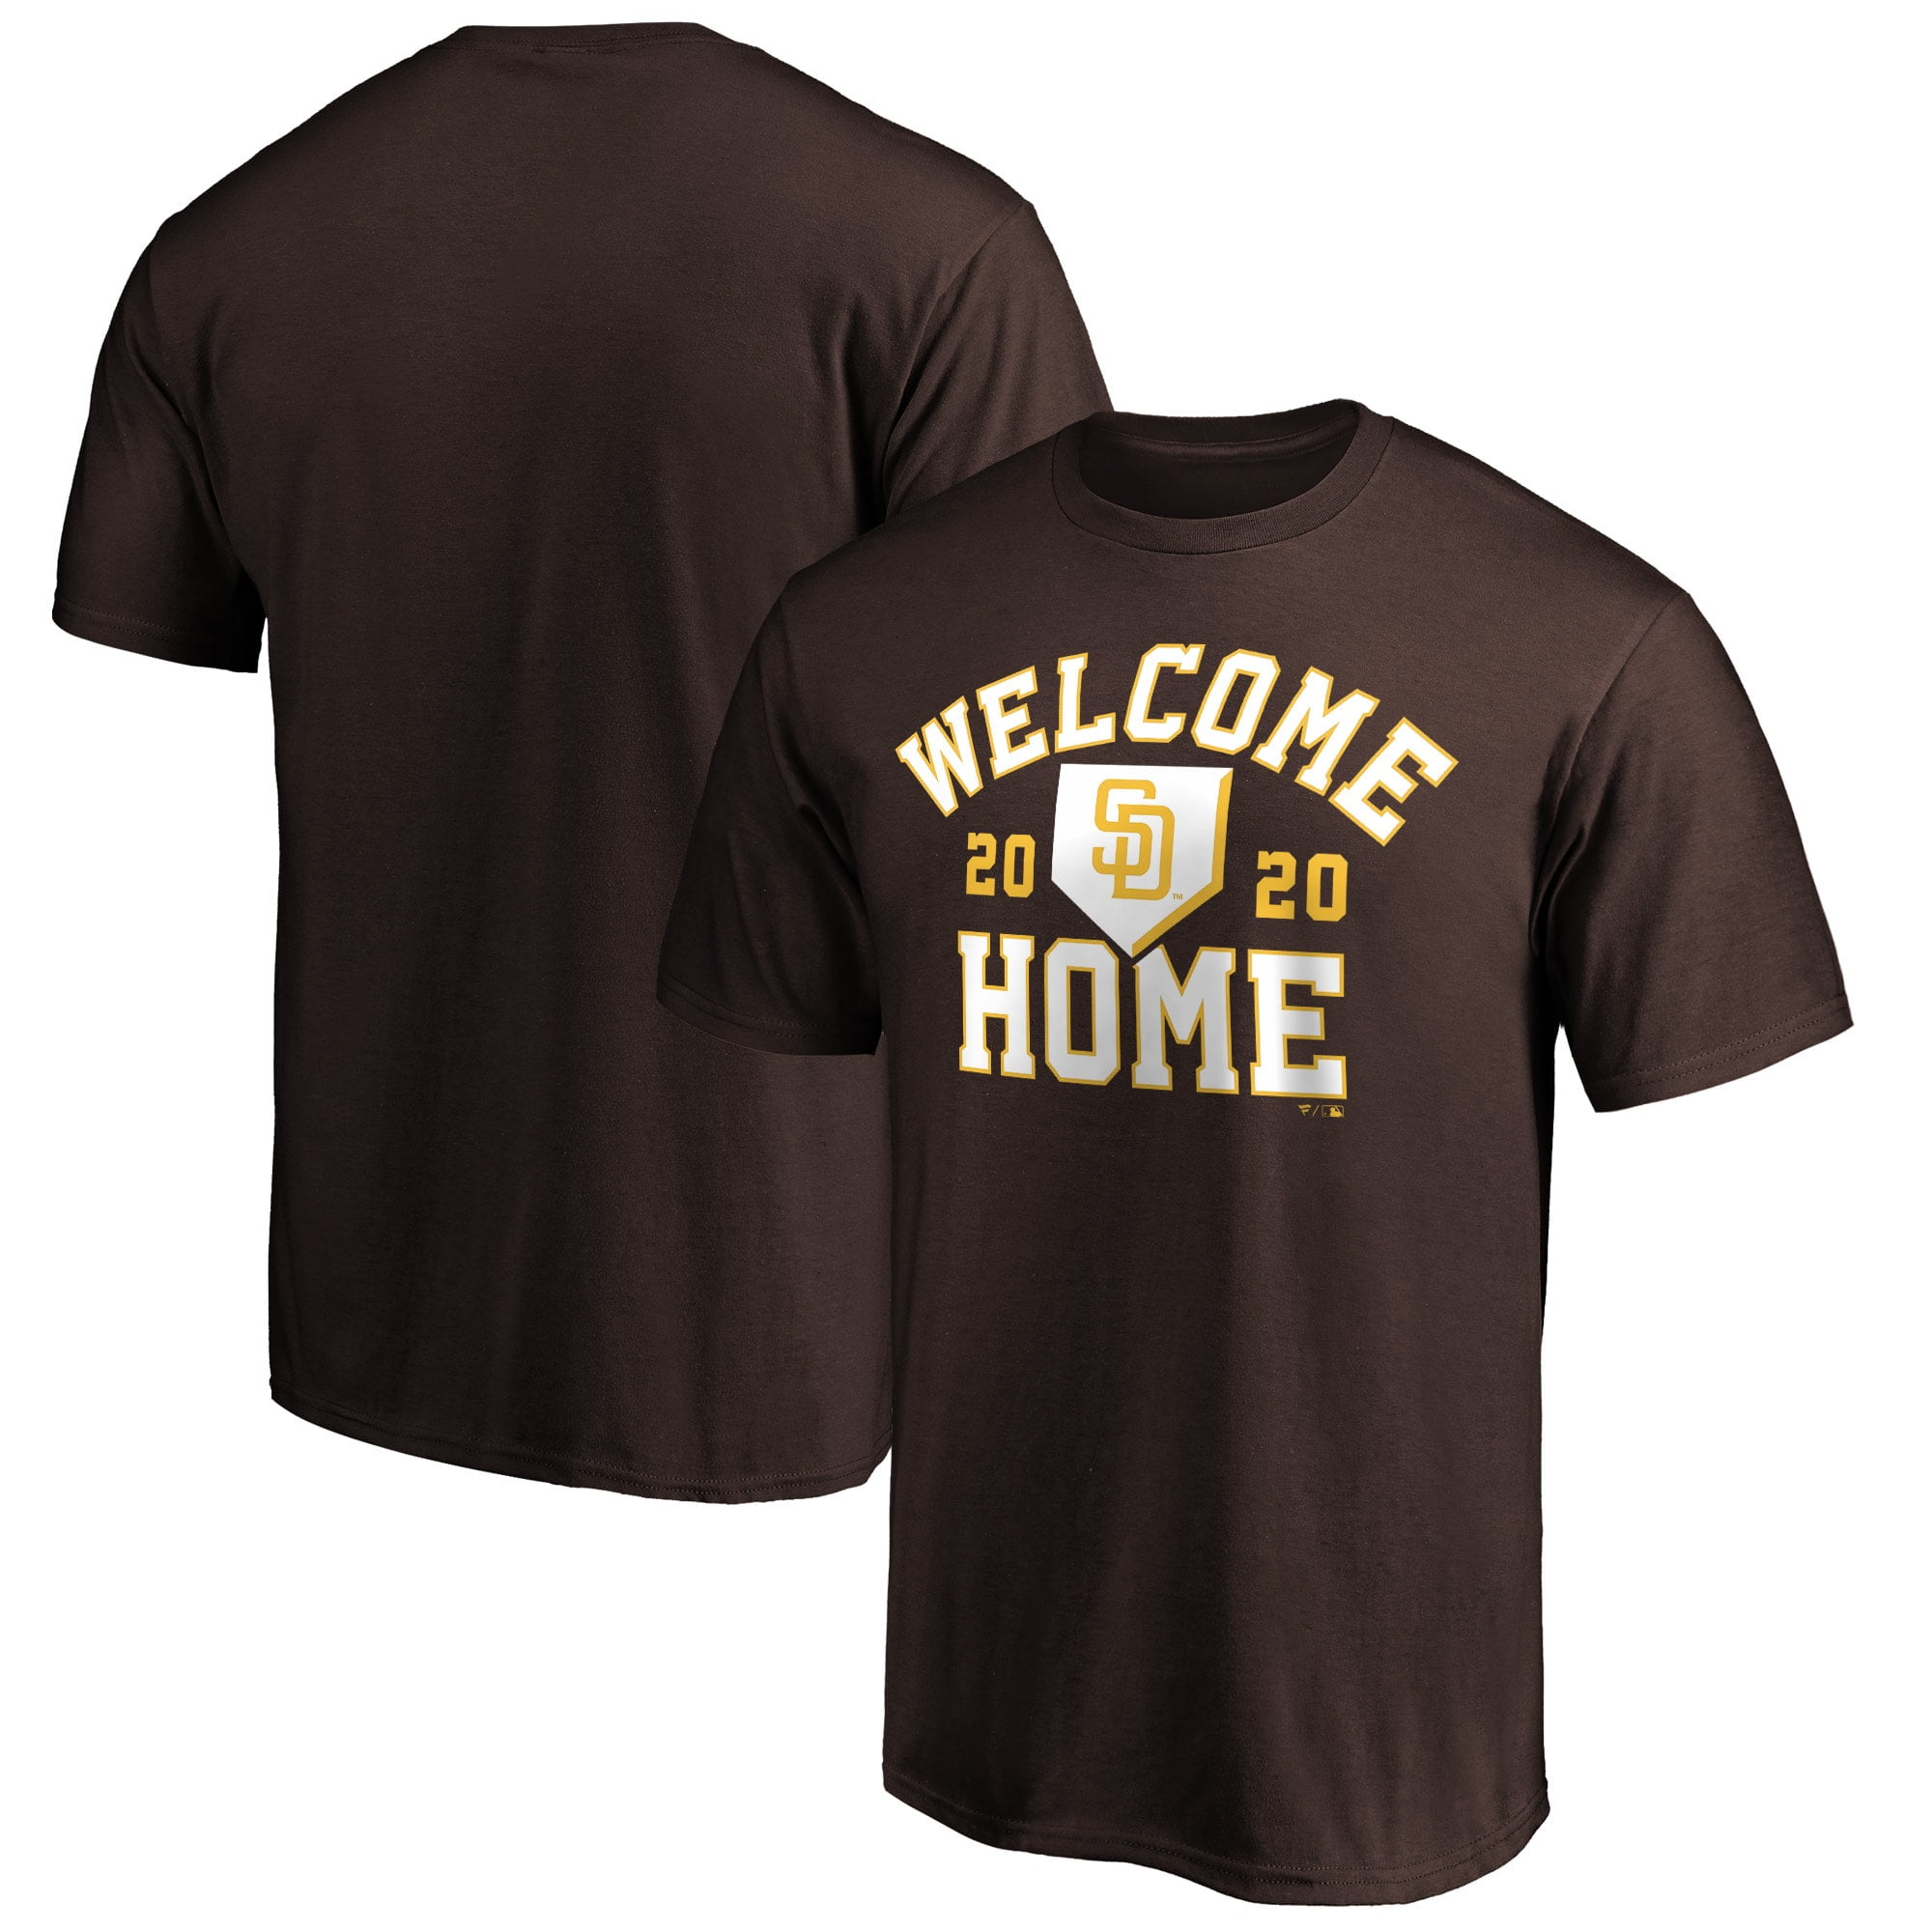 San Diego Padres Fanatics Branded Welcome Home T-Shirt - Brown ...